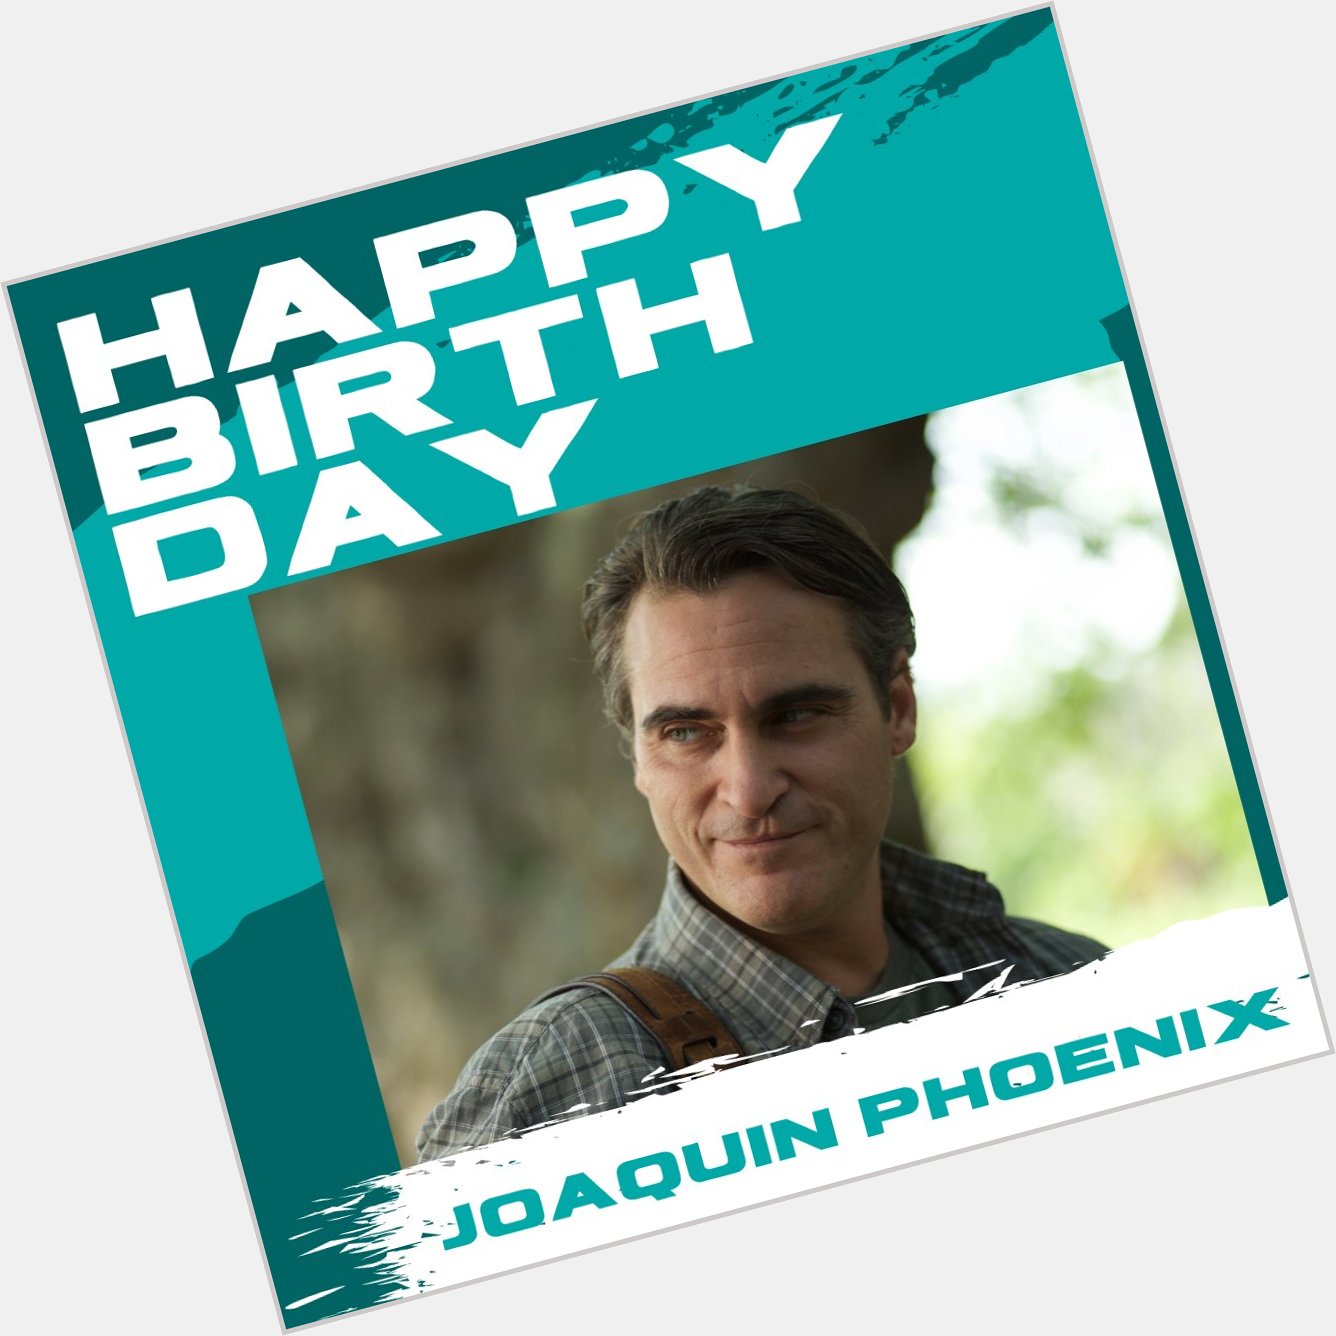 Happy birthday, Joaquin Phoenix!

What is the first movie that comes to mind when you think of him? 